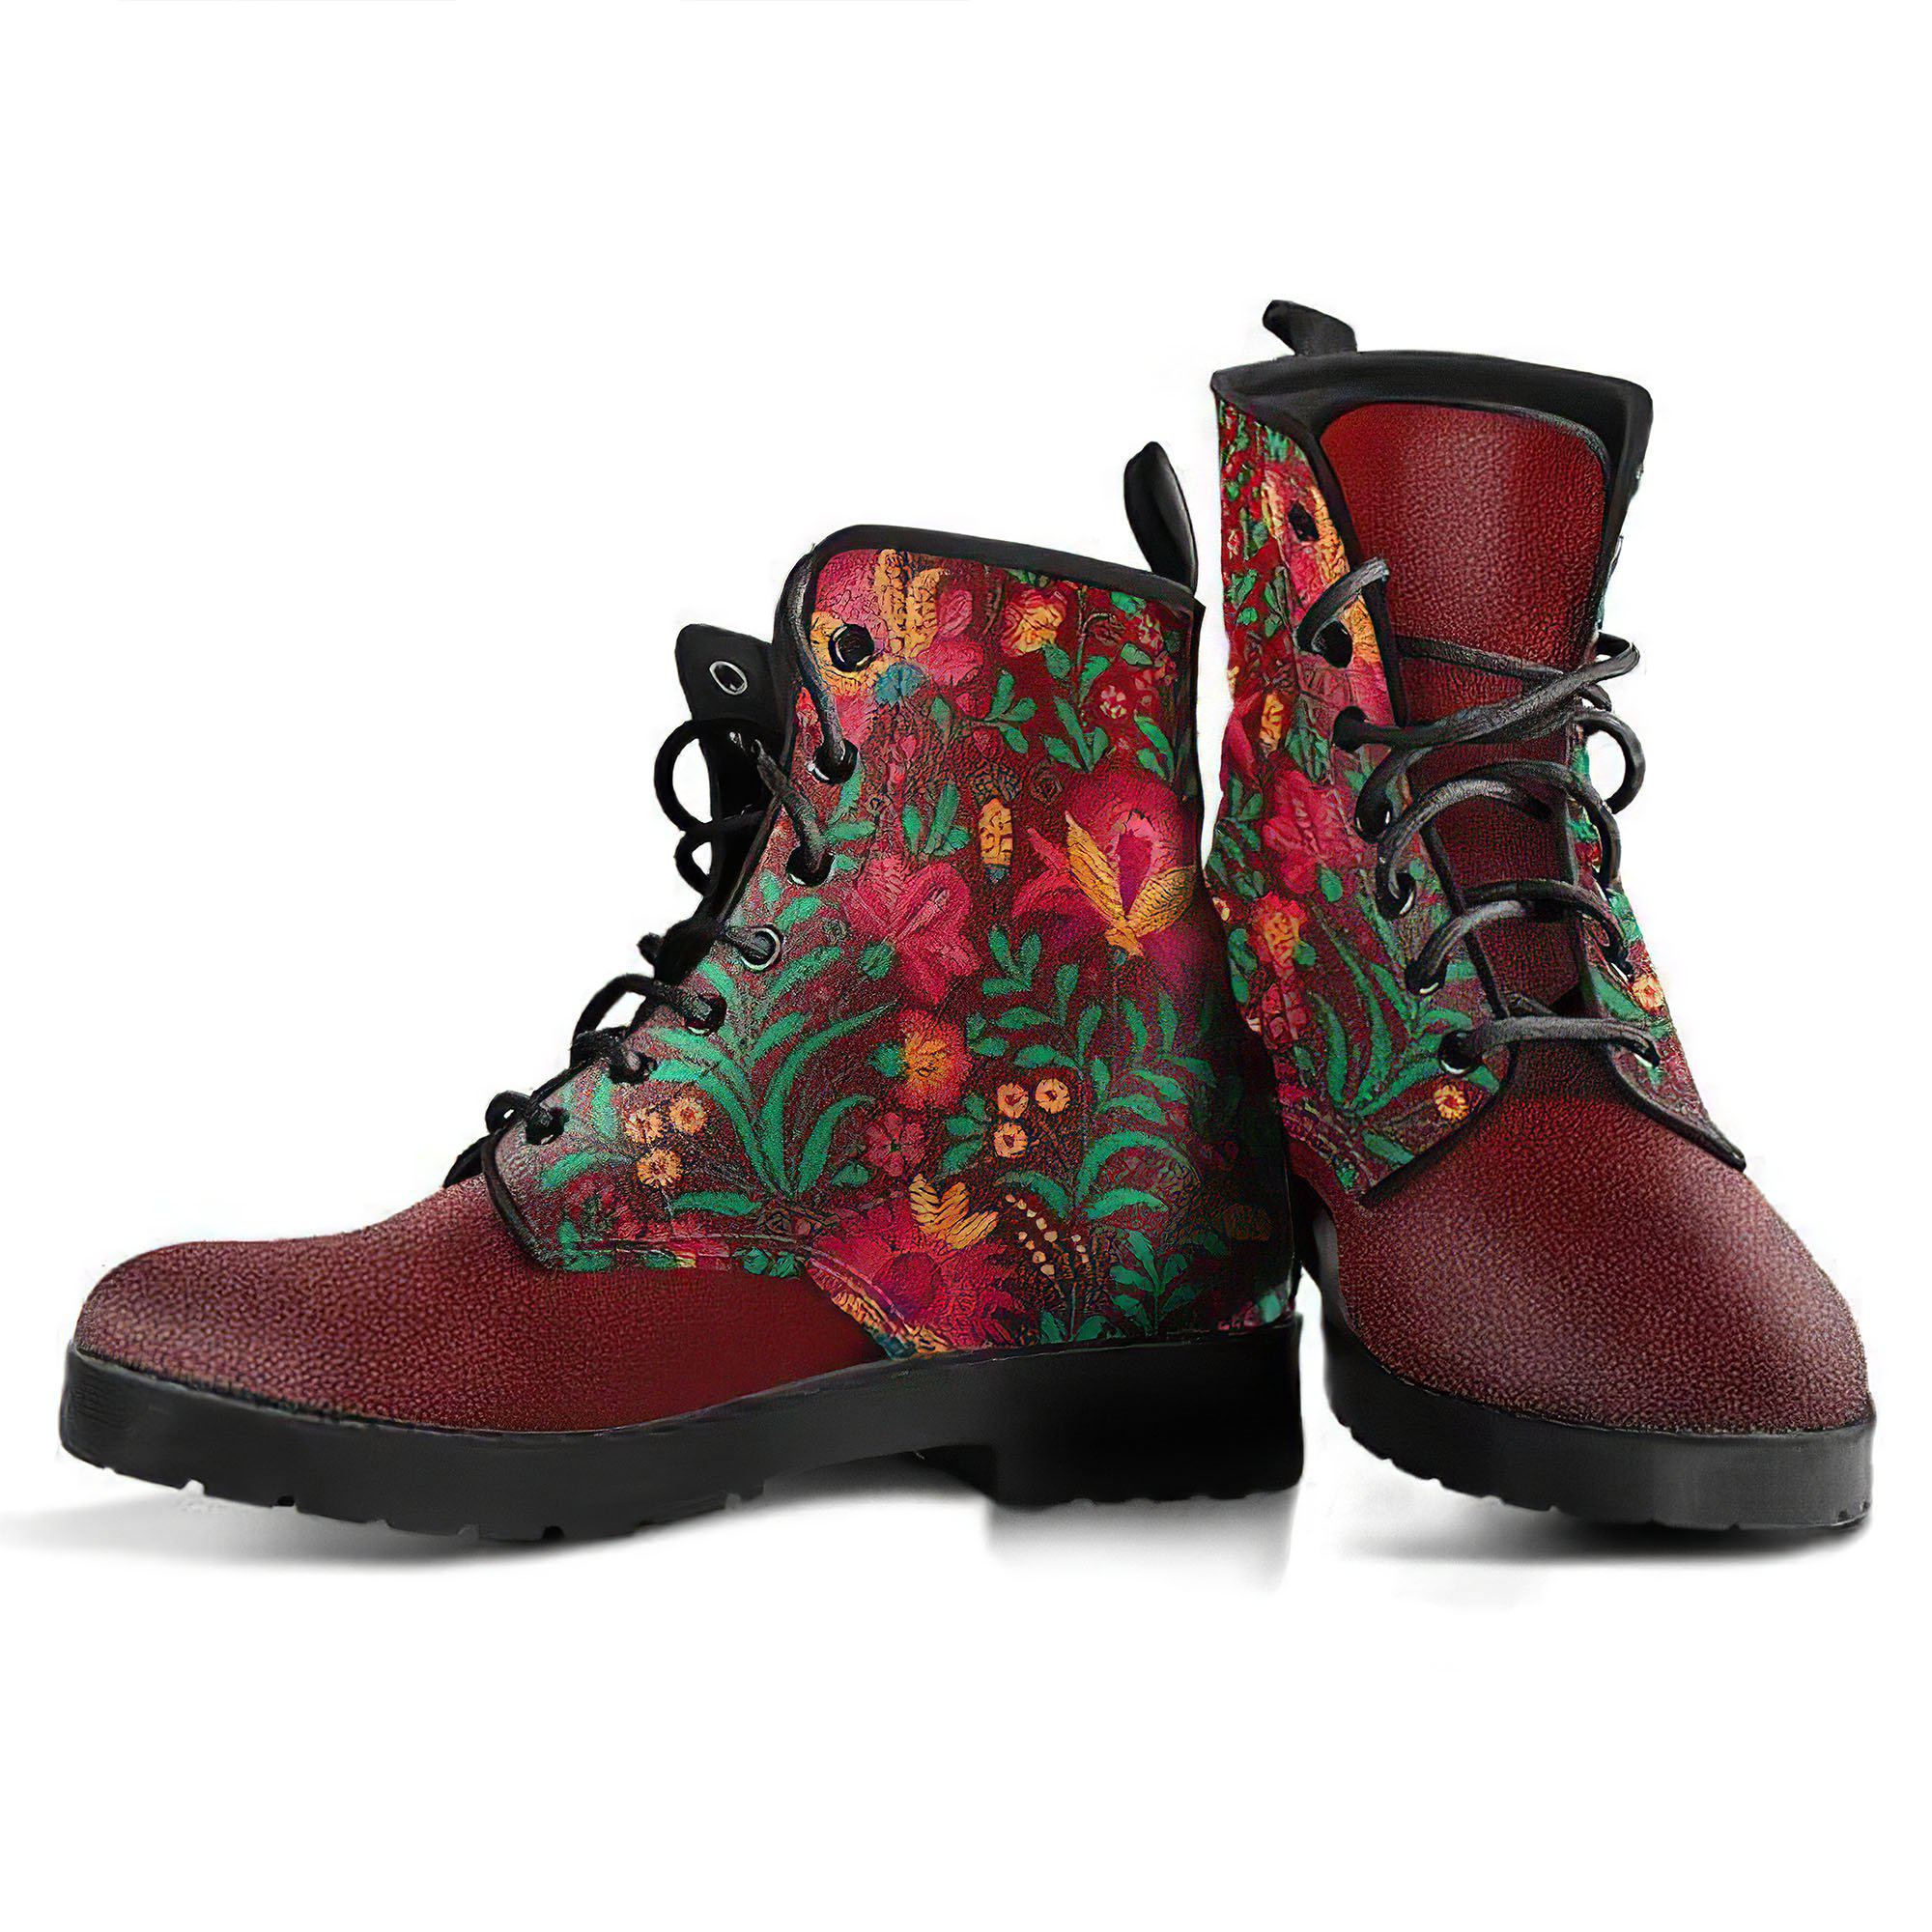 floral-pattern-3-handcrafted-boots-gp-main.jpg